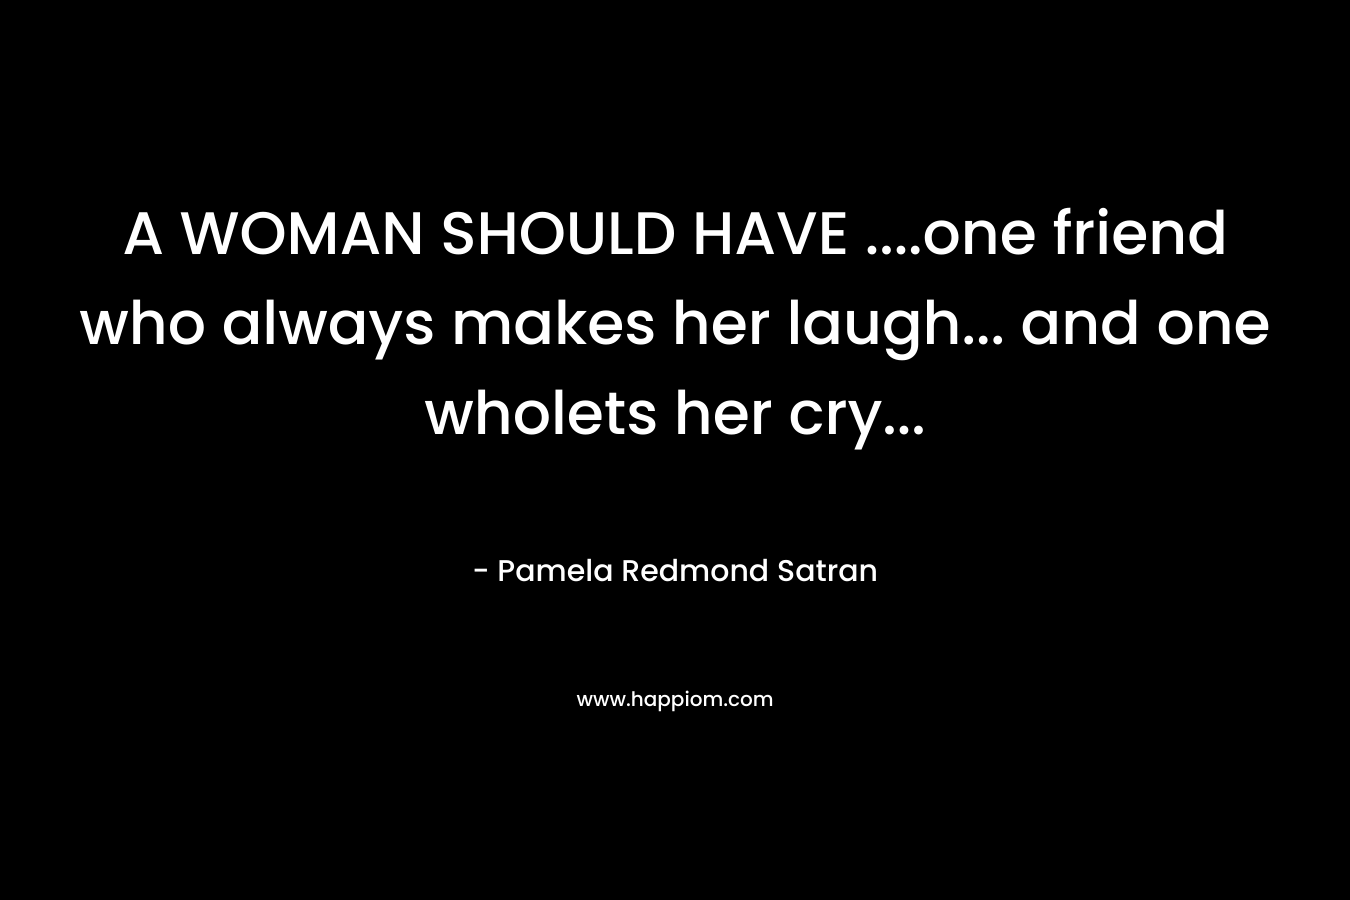 A WOMAN SHOULD HAVE ....one friend who always makes her laugh... and one wholets her cry...